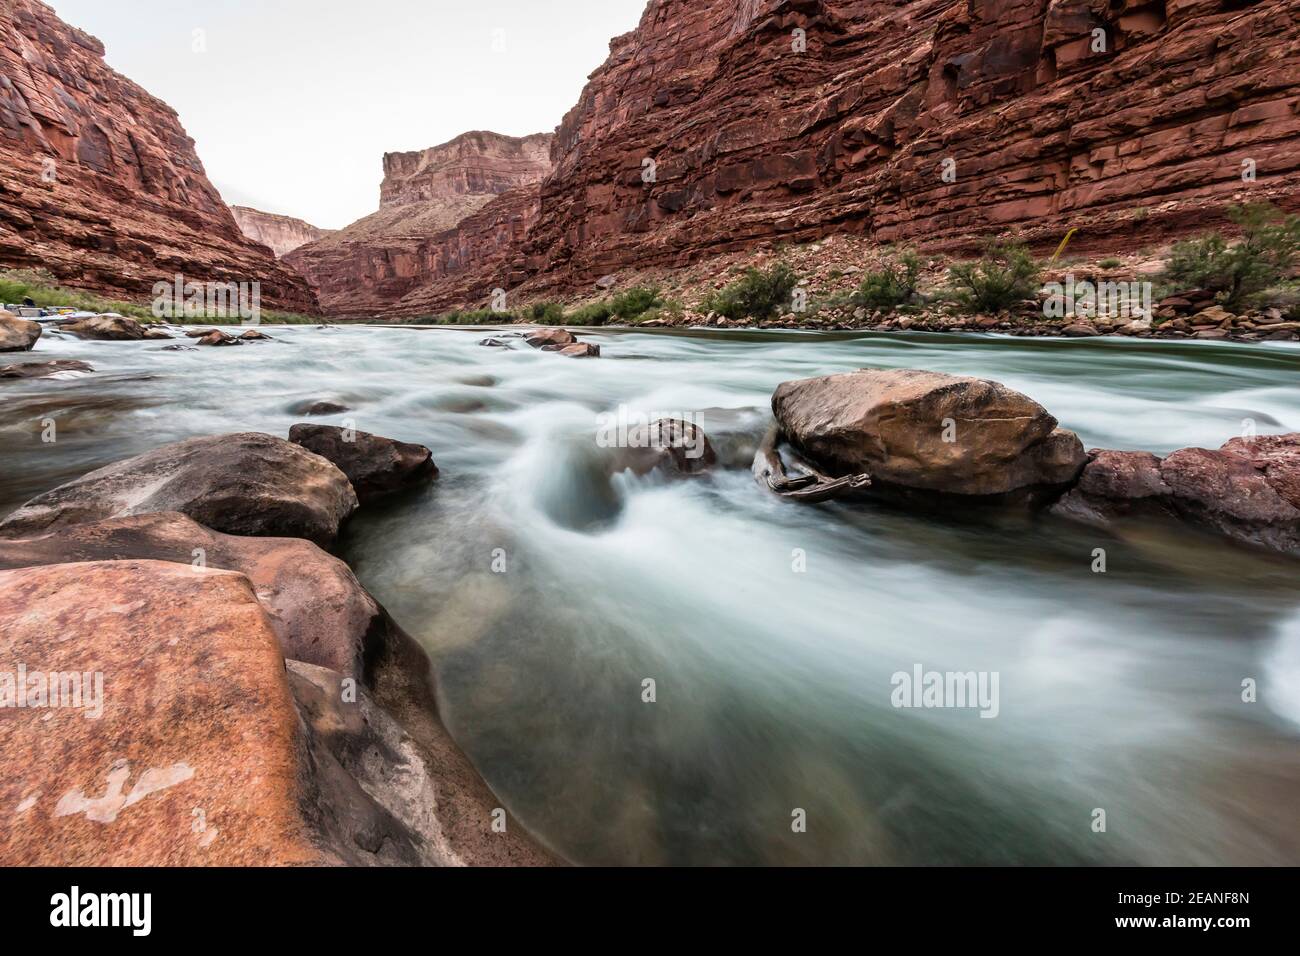 Rapids on the Colorado River, Marble Canyon, Grand Canyon National Park, UNESCO World Heritage Site, Arizona, United States of America, North America Stock Photo